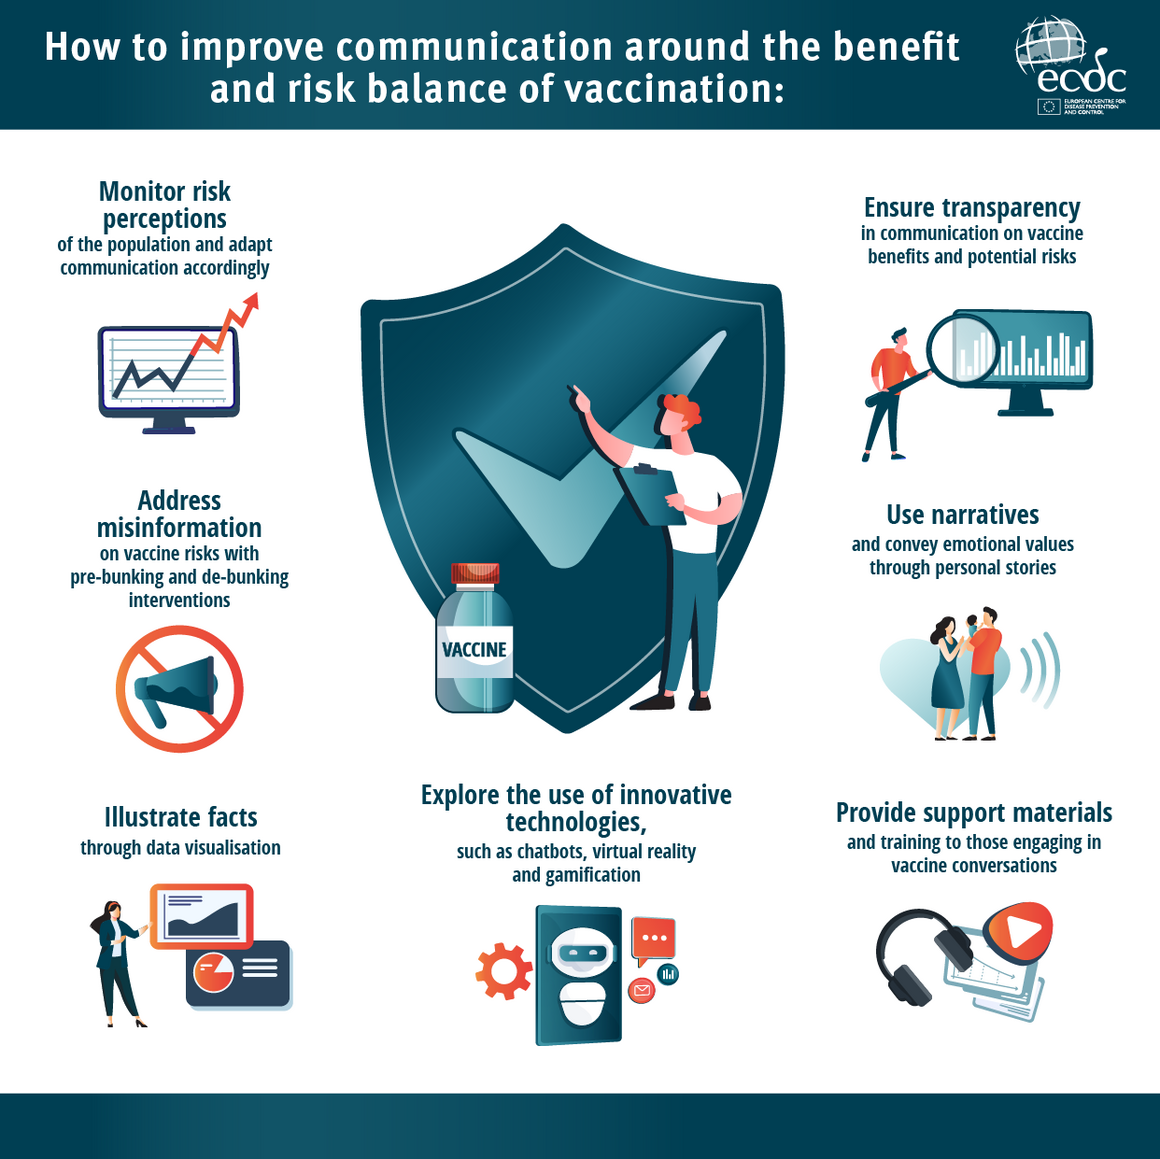 How to improve communication around the benefit and risk balance of vaccination infographic